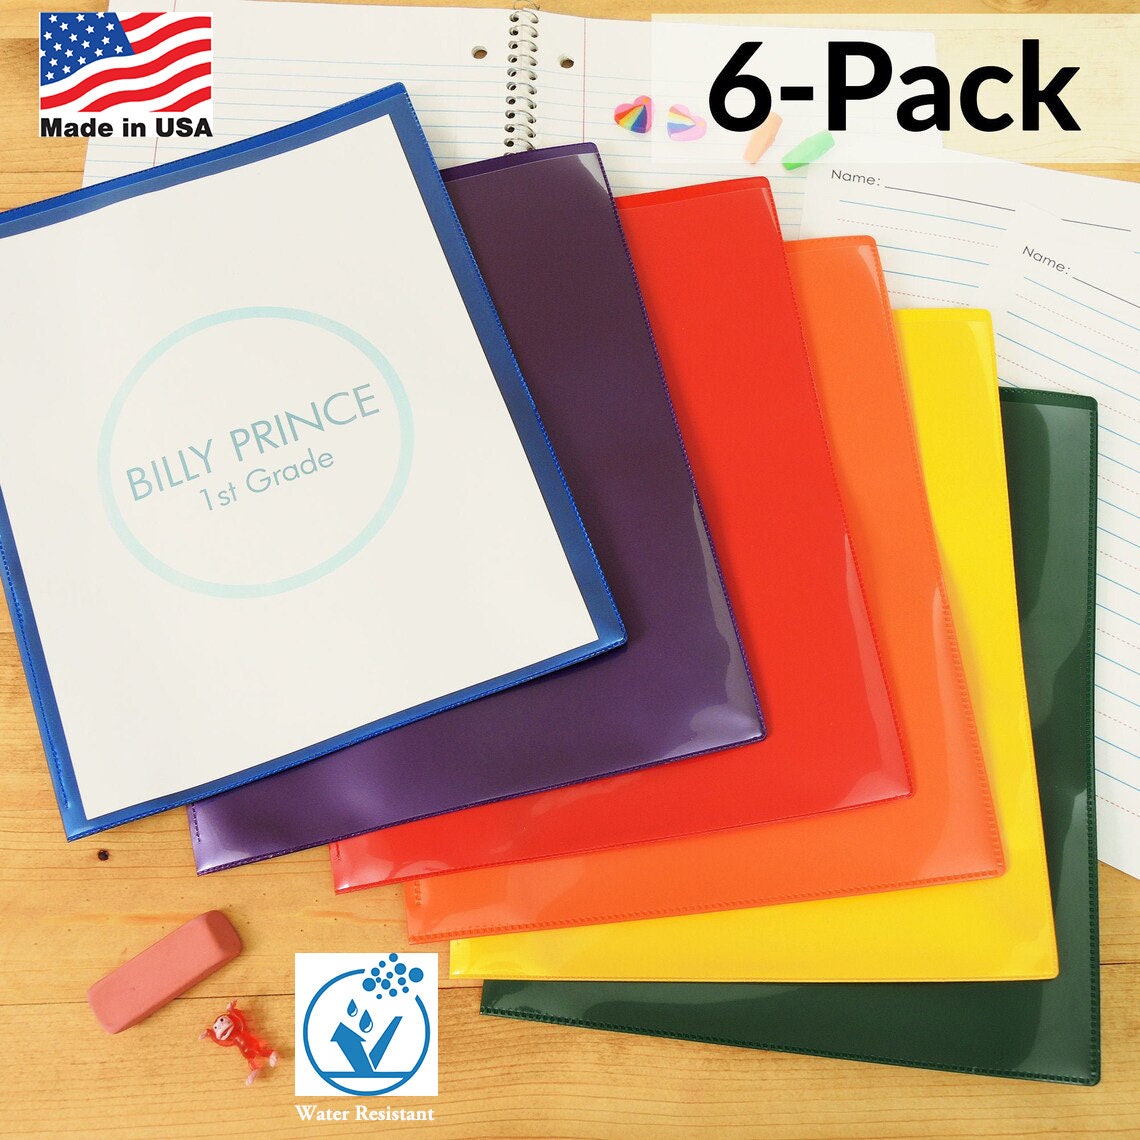 Clear Overlay Plastic 2-pocket Folders Primary Colors 6-pack: 1 Each of Six  Bright Colors Made in U.S.A R900PCP6 